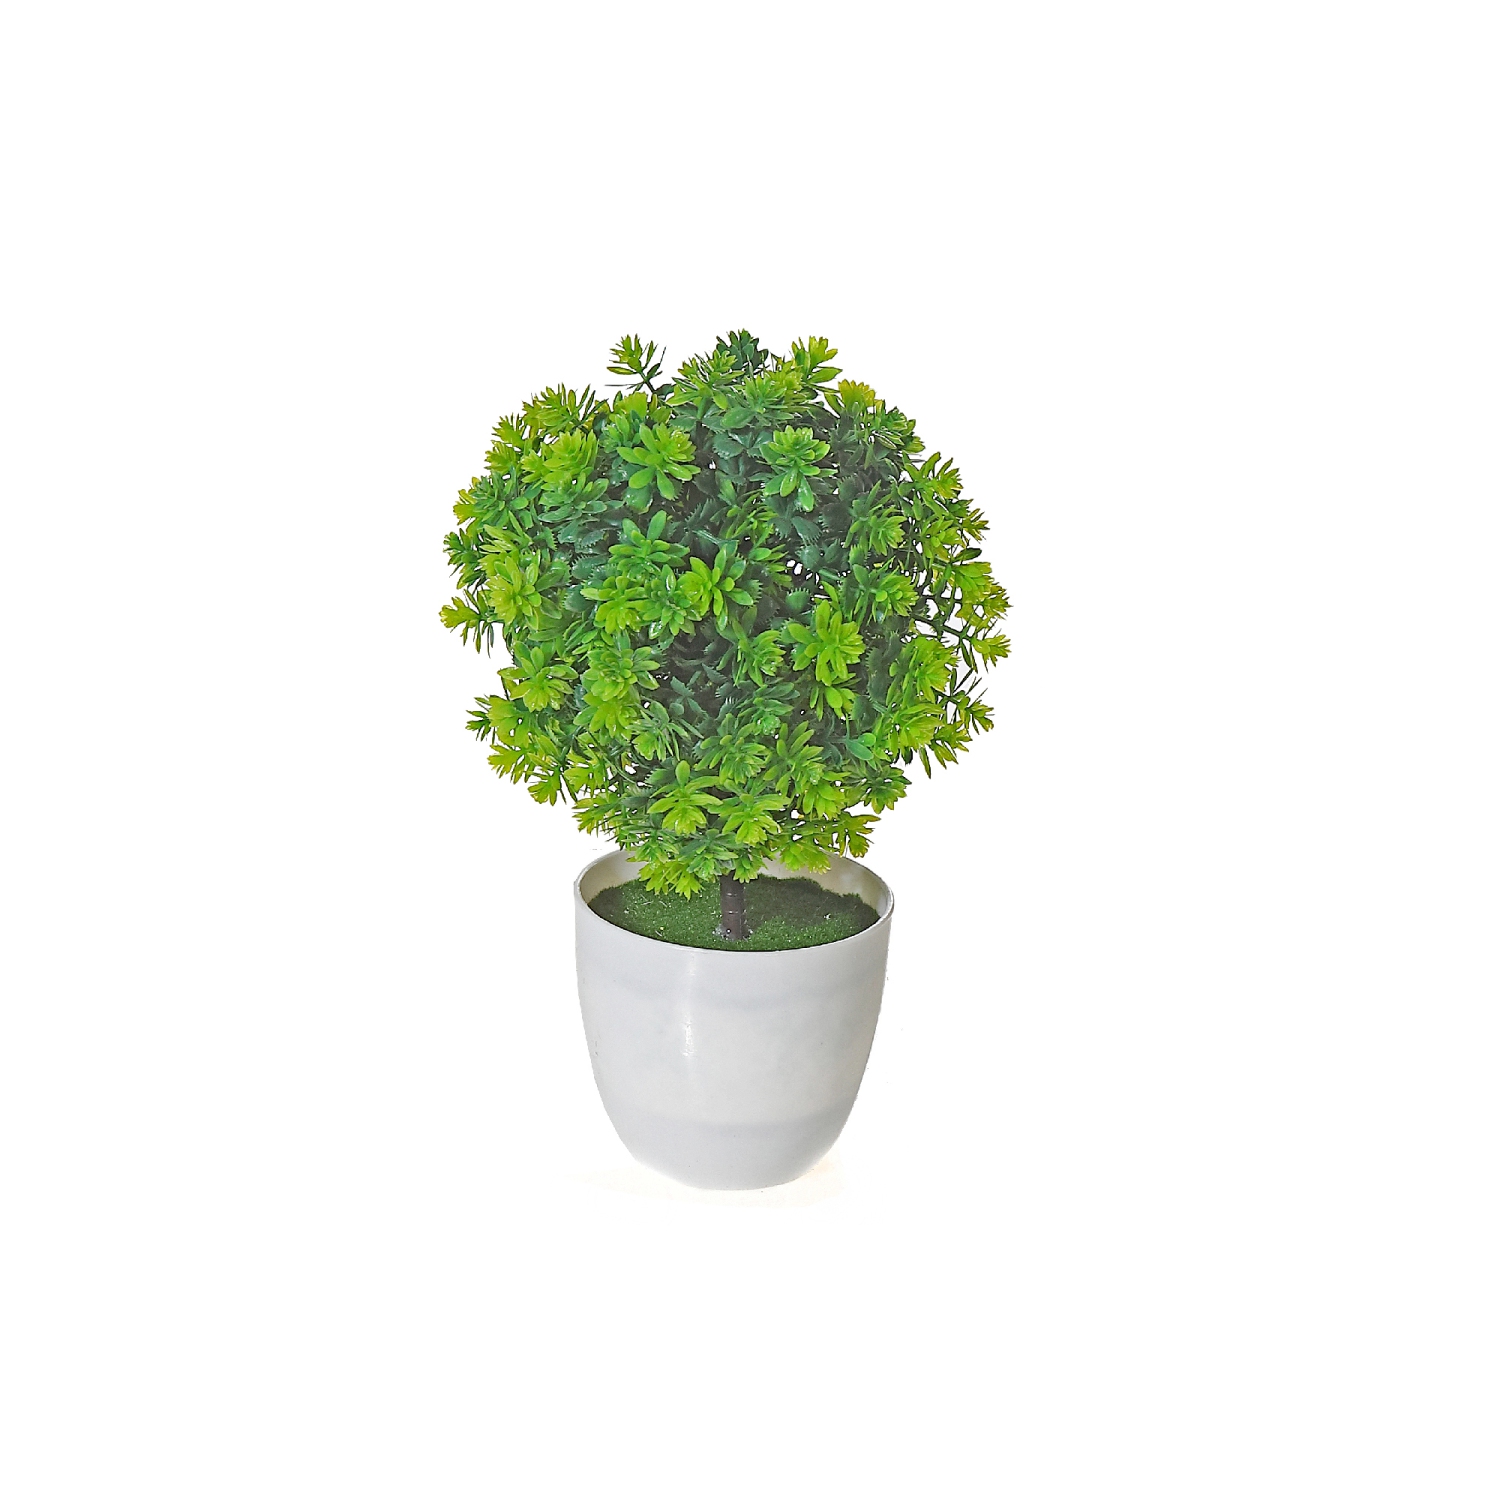 Maison Concepts Artificial Green Topiary Ball Plant In White Pot - Set of 2